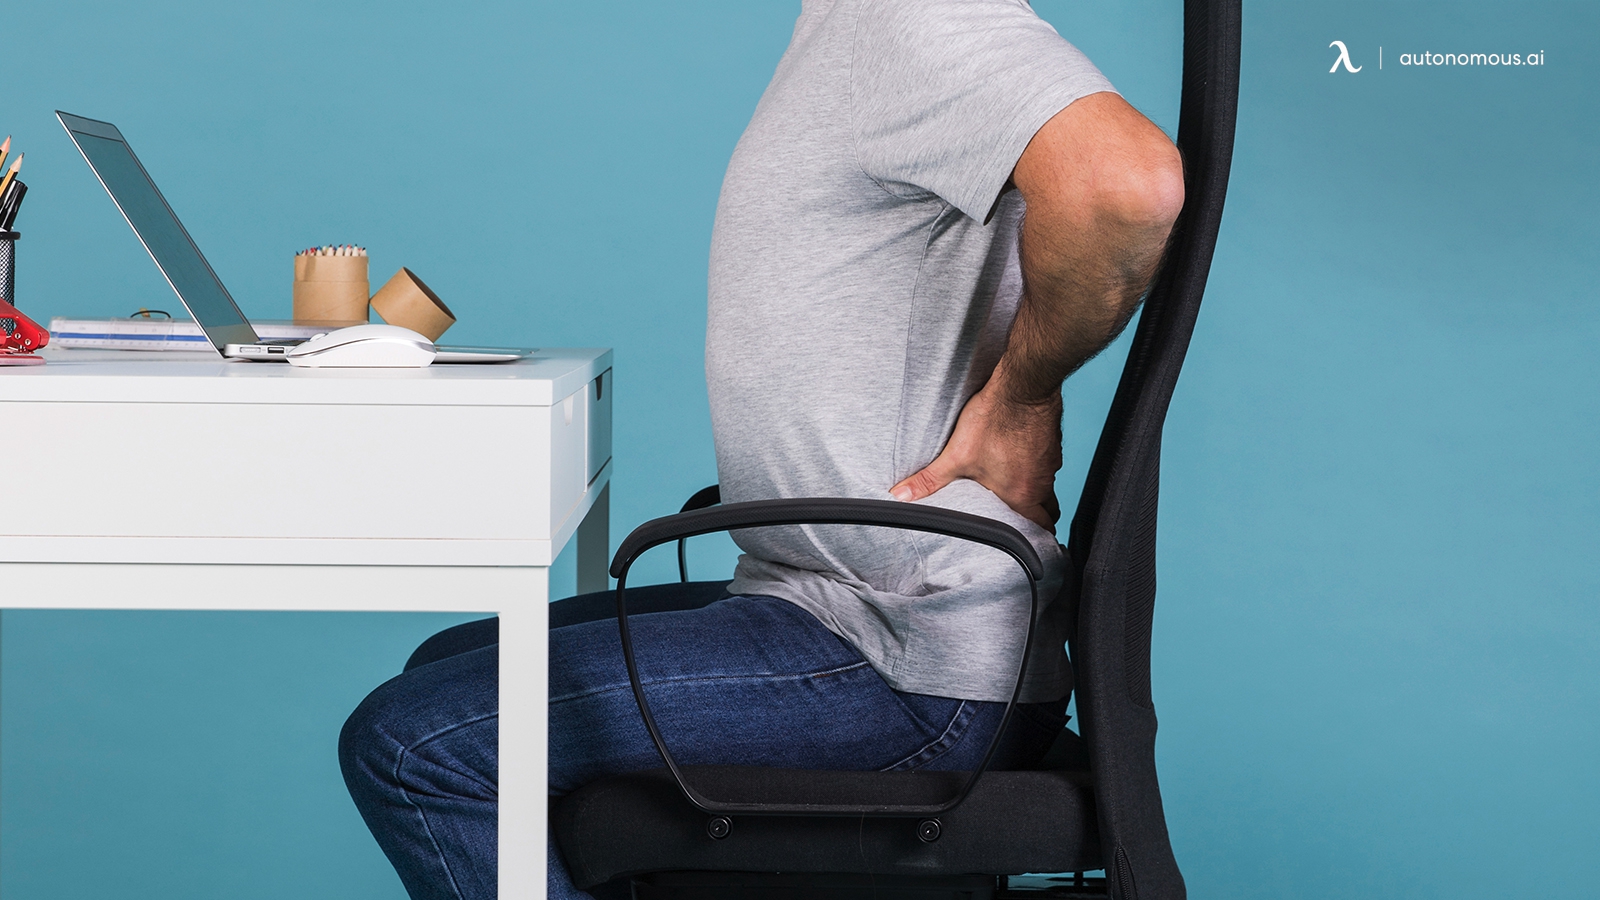 8 Common Ergonomic Injuries at The Office (And How to Avoid Them)